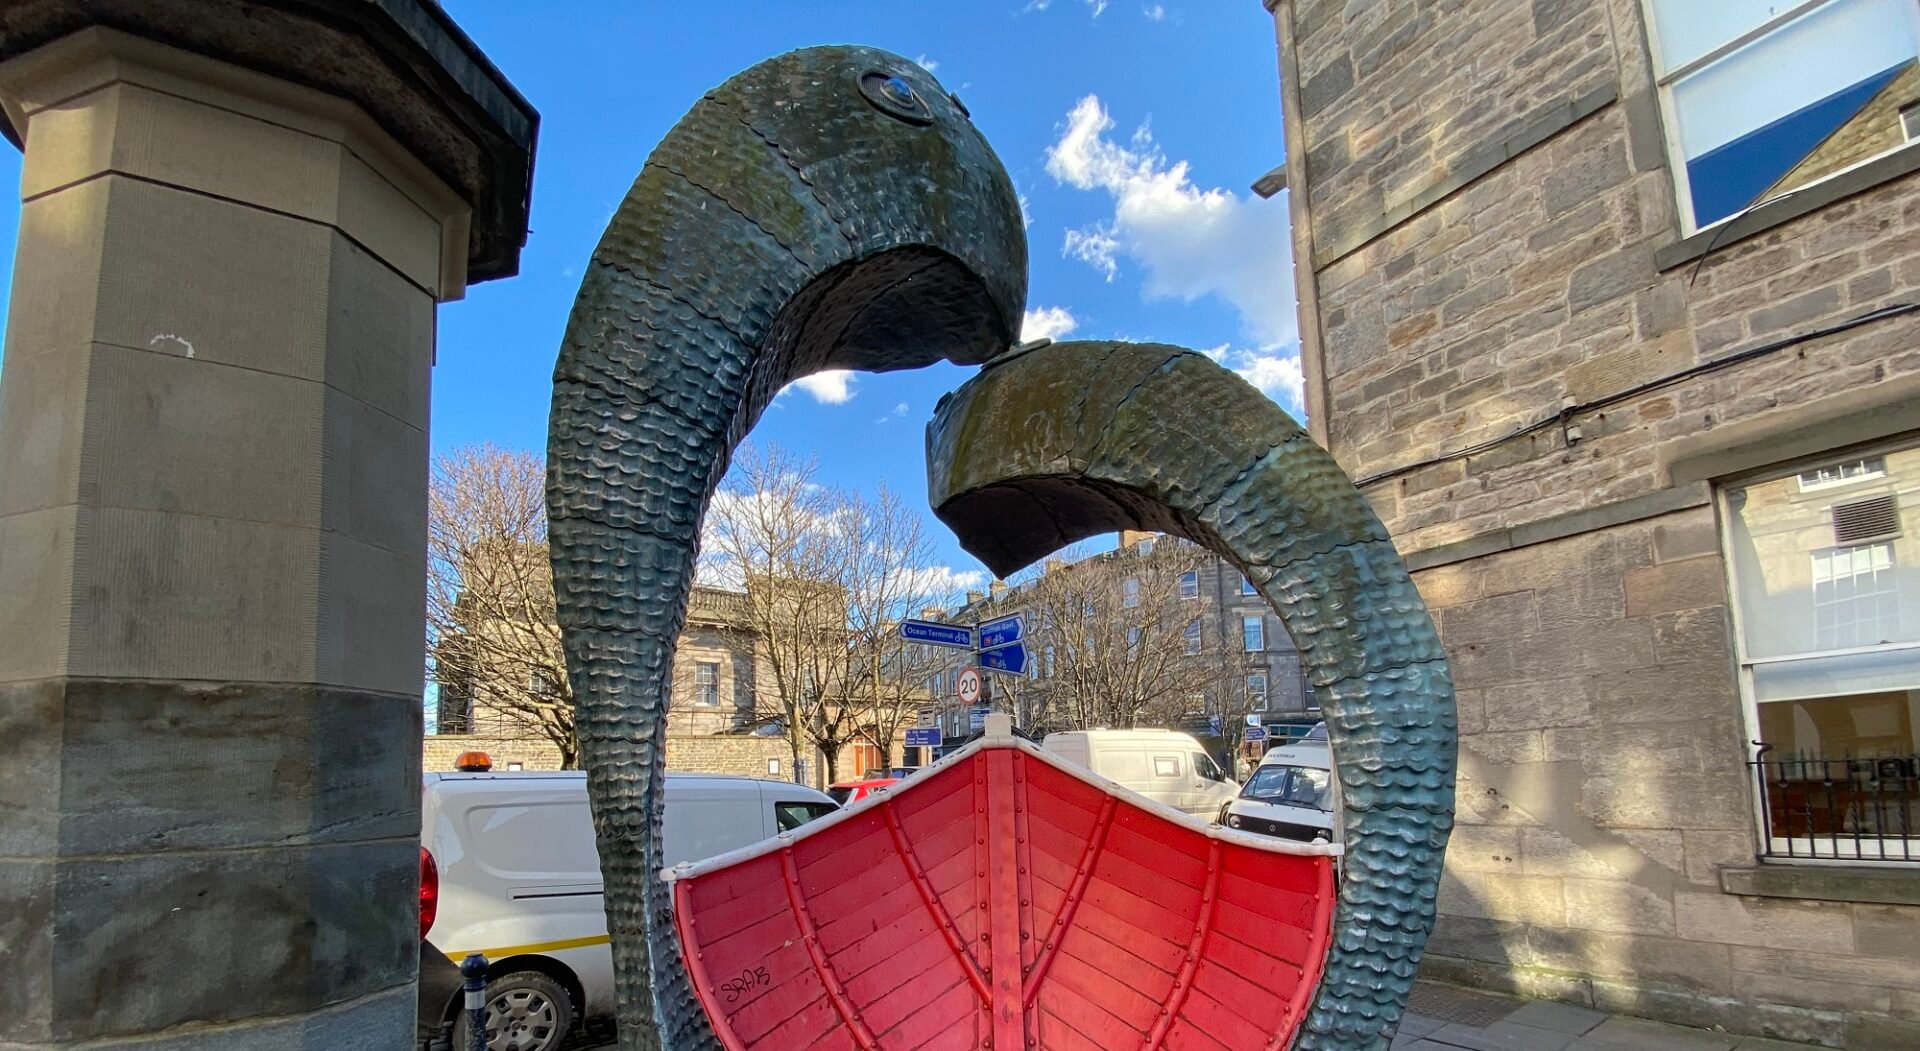 Leith Fish & Boat Sculpture